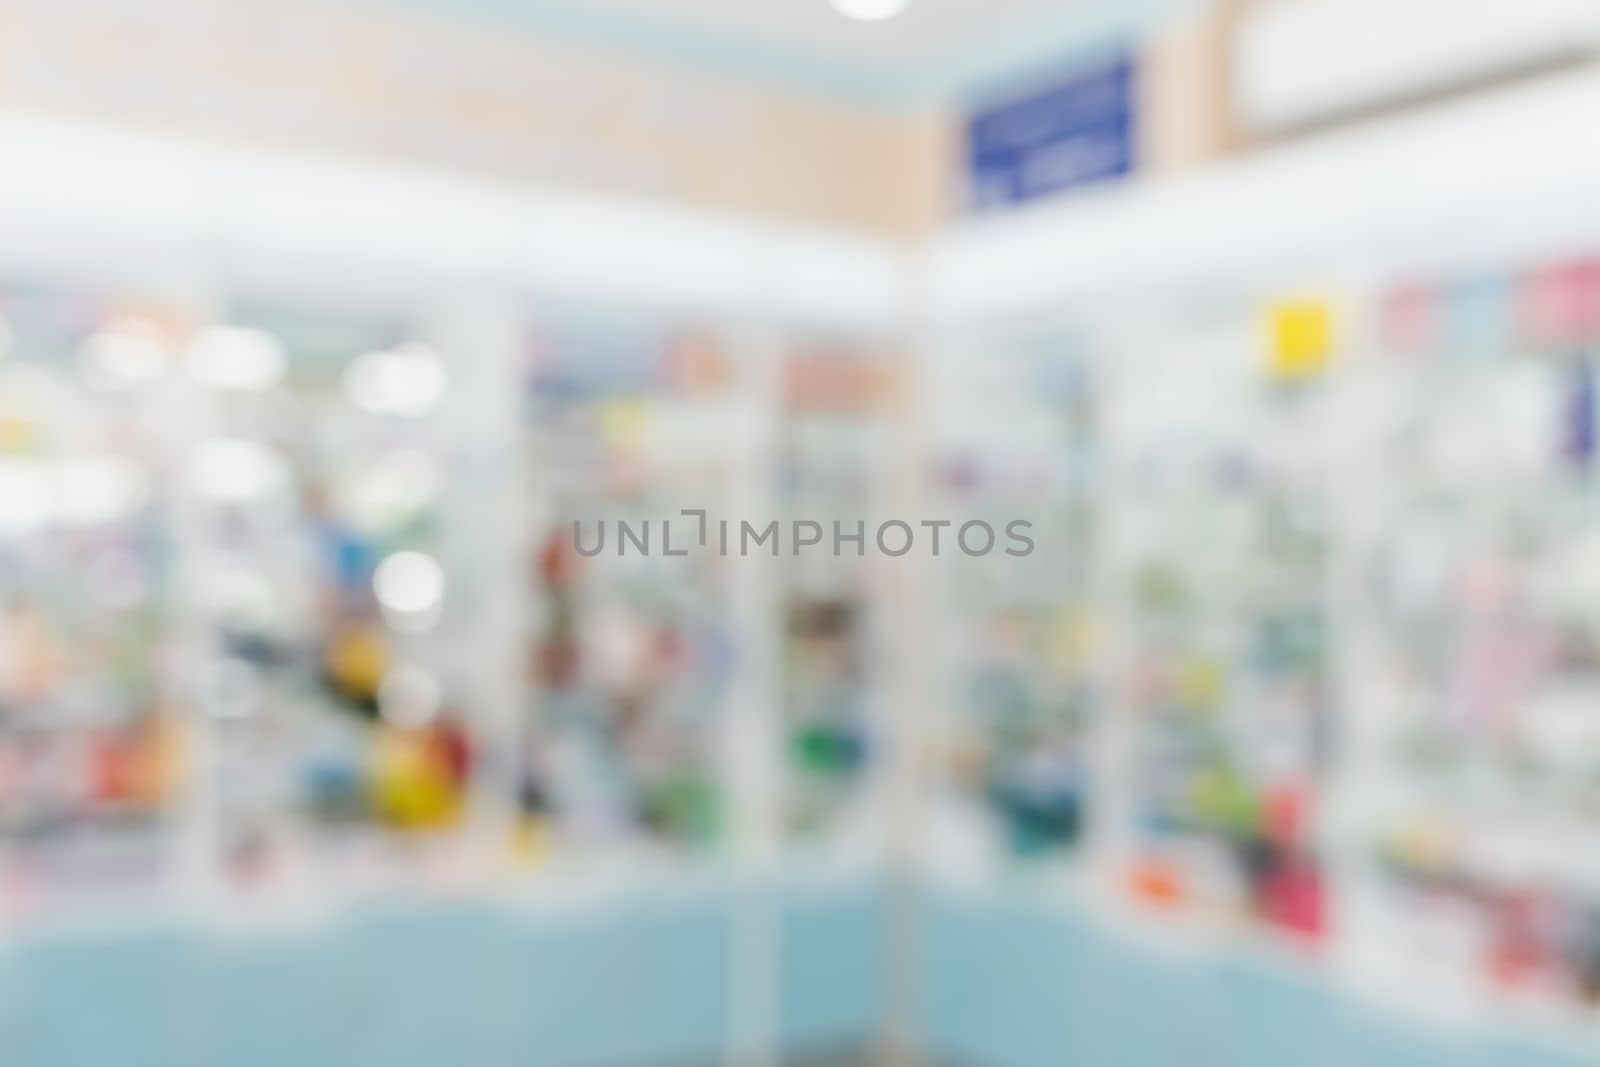 Pharmacy blurred abstract background qualified drug, medicinal product on shelf background. Blurry light tone wallpaper of drugstore's interior medications displayed on shelves for healthcare concept.